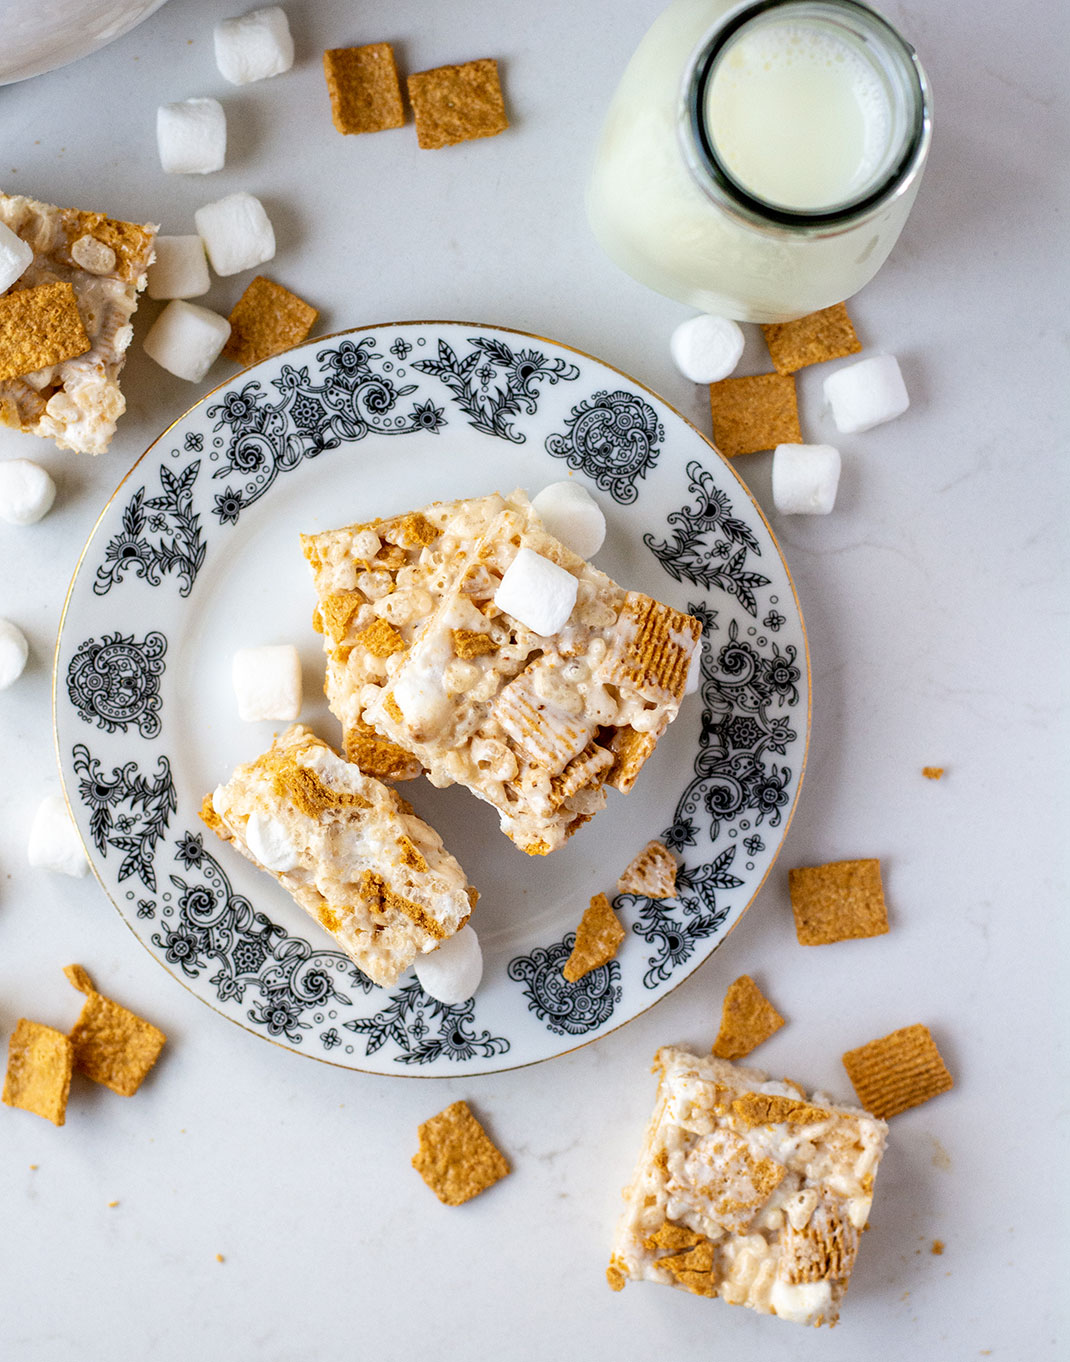 rice krispie squares on plate with cereal and marshmallows around it